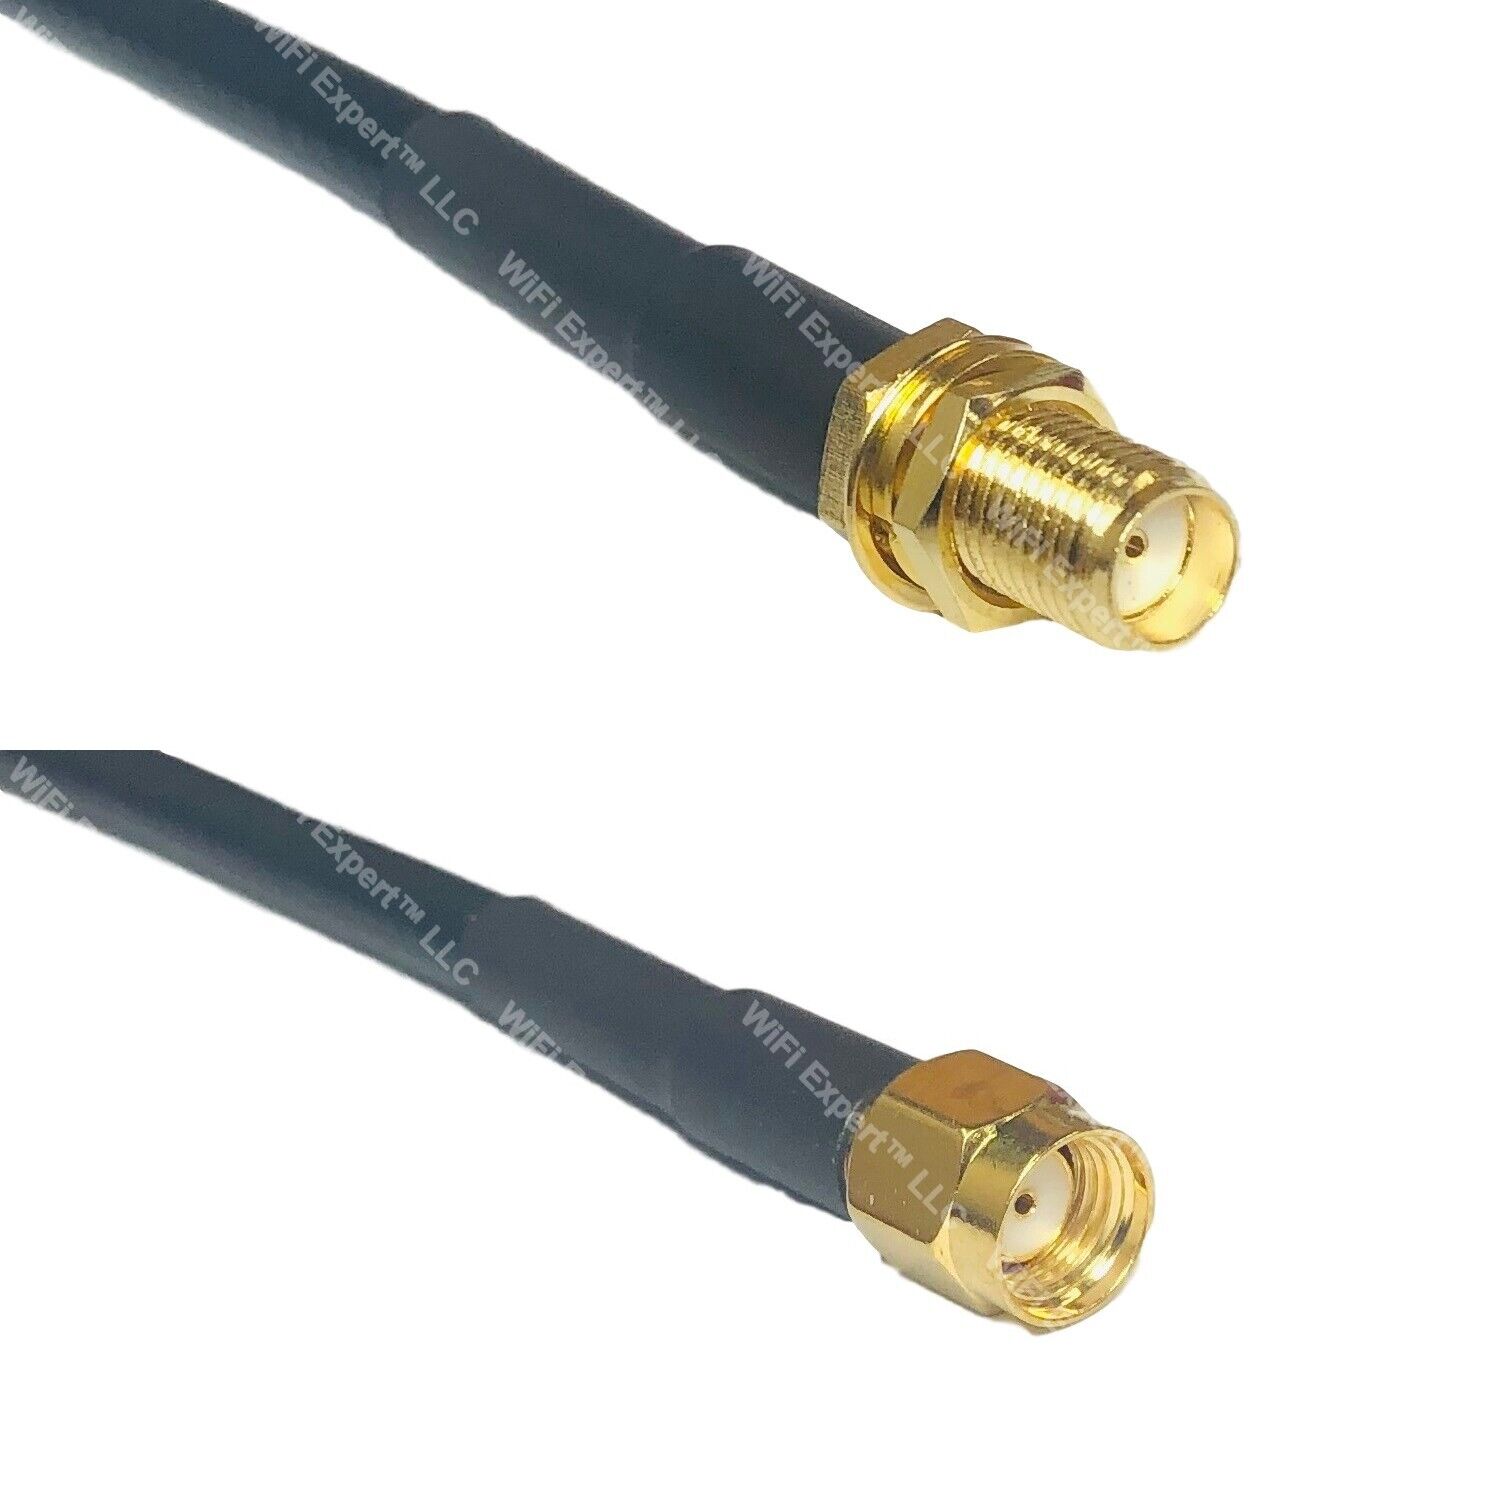 RFC240 SMA FEMALE to RP-SMA MALE Coax RF Cable USA-Ship Lot. Available Now for 11.99